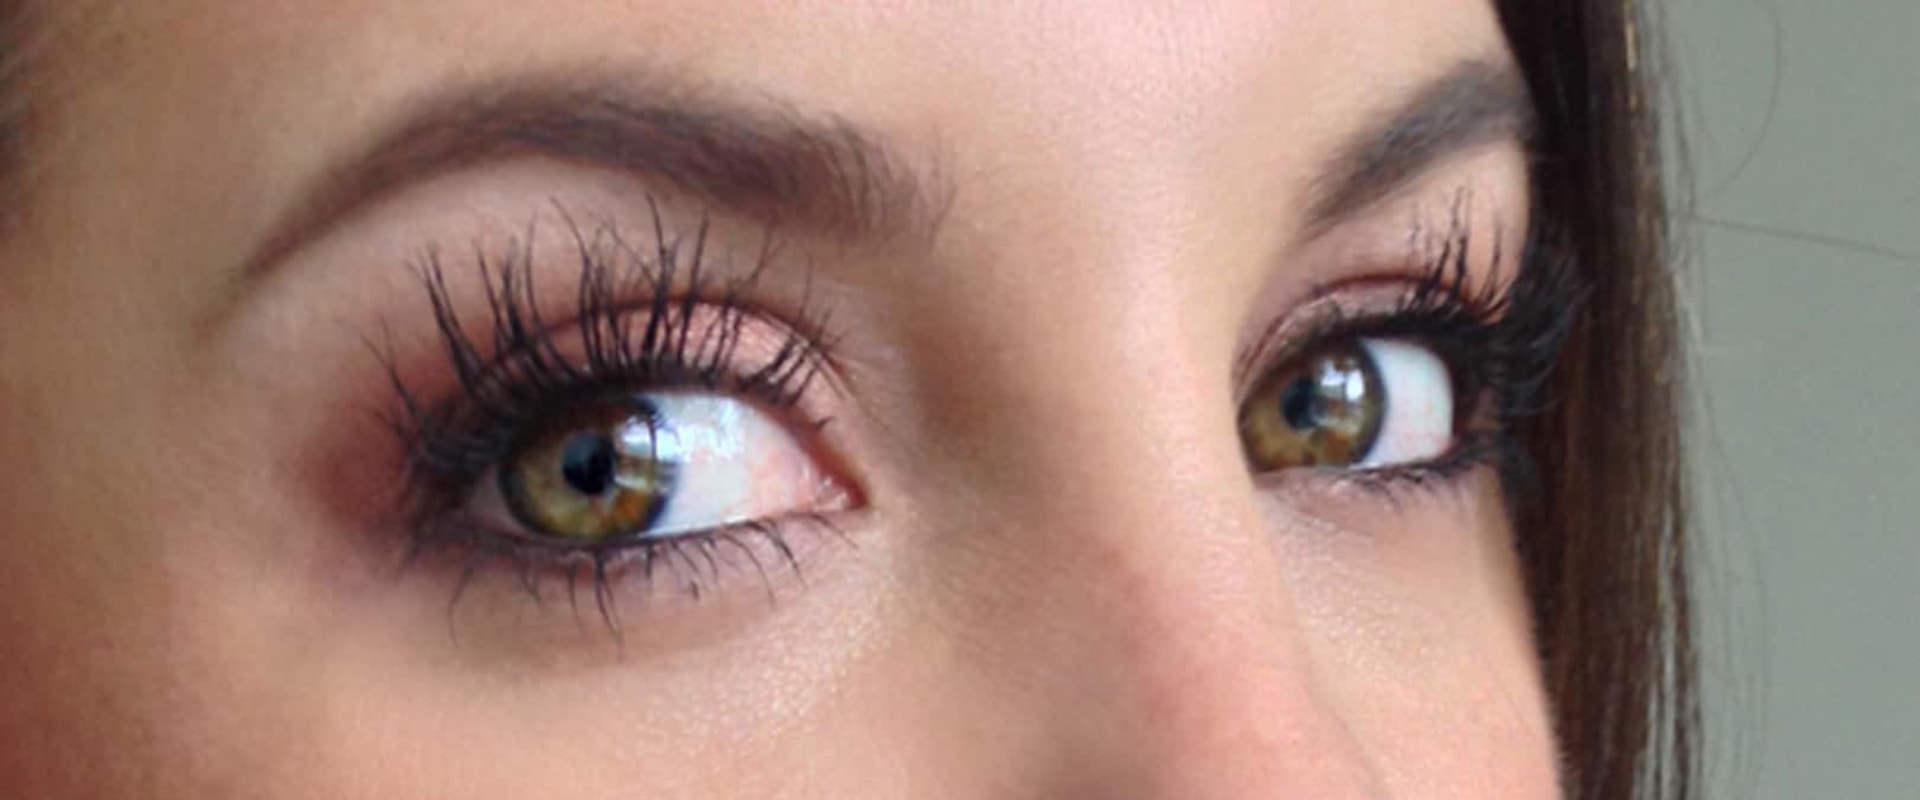 How long is too long eyelashes?